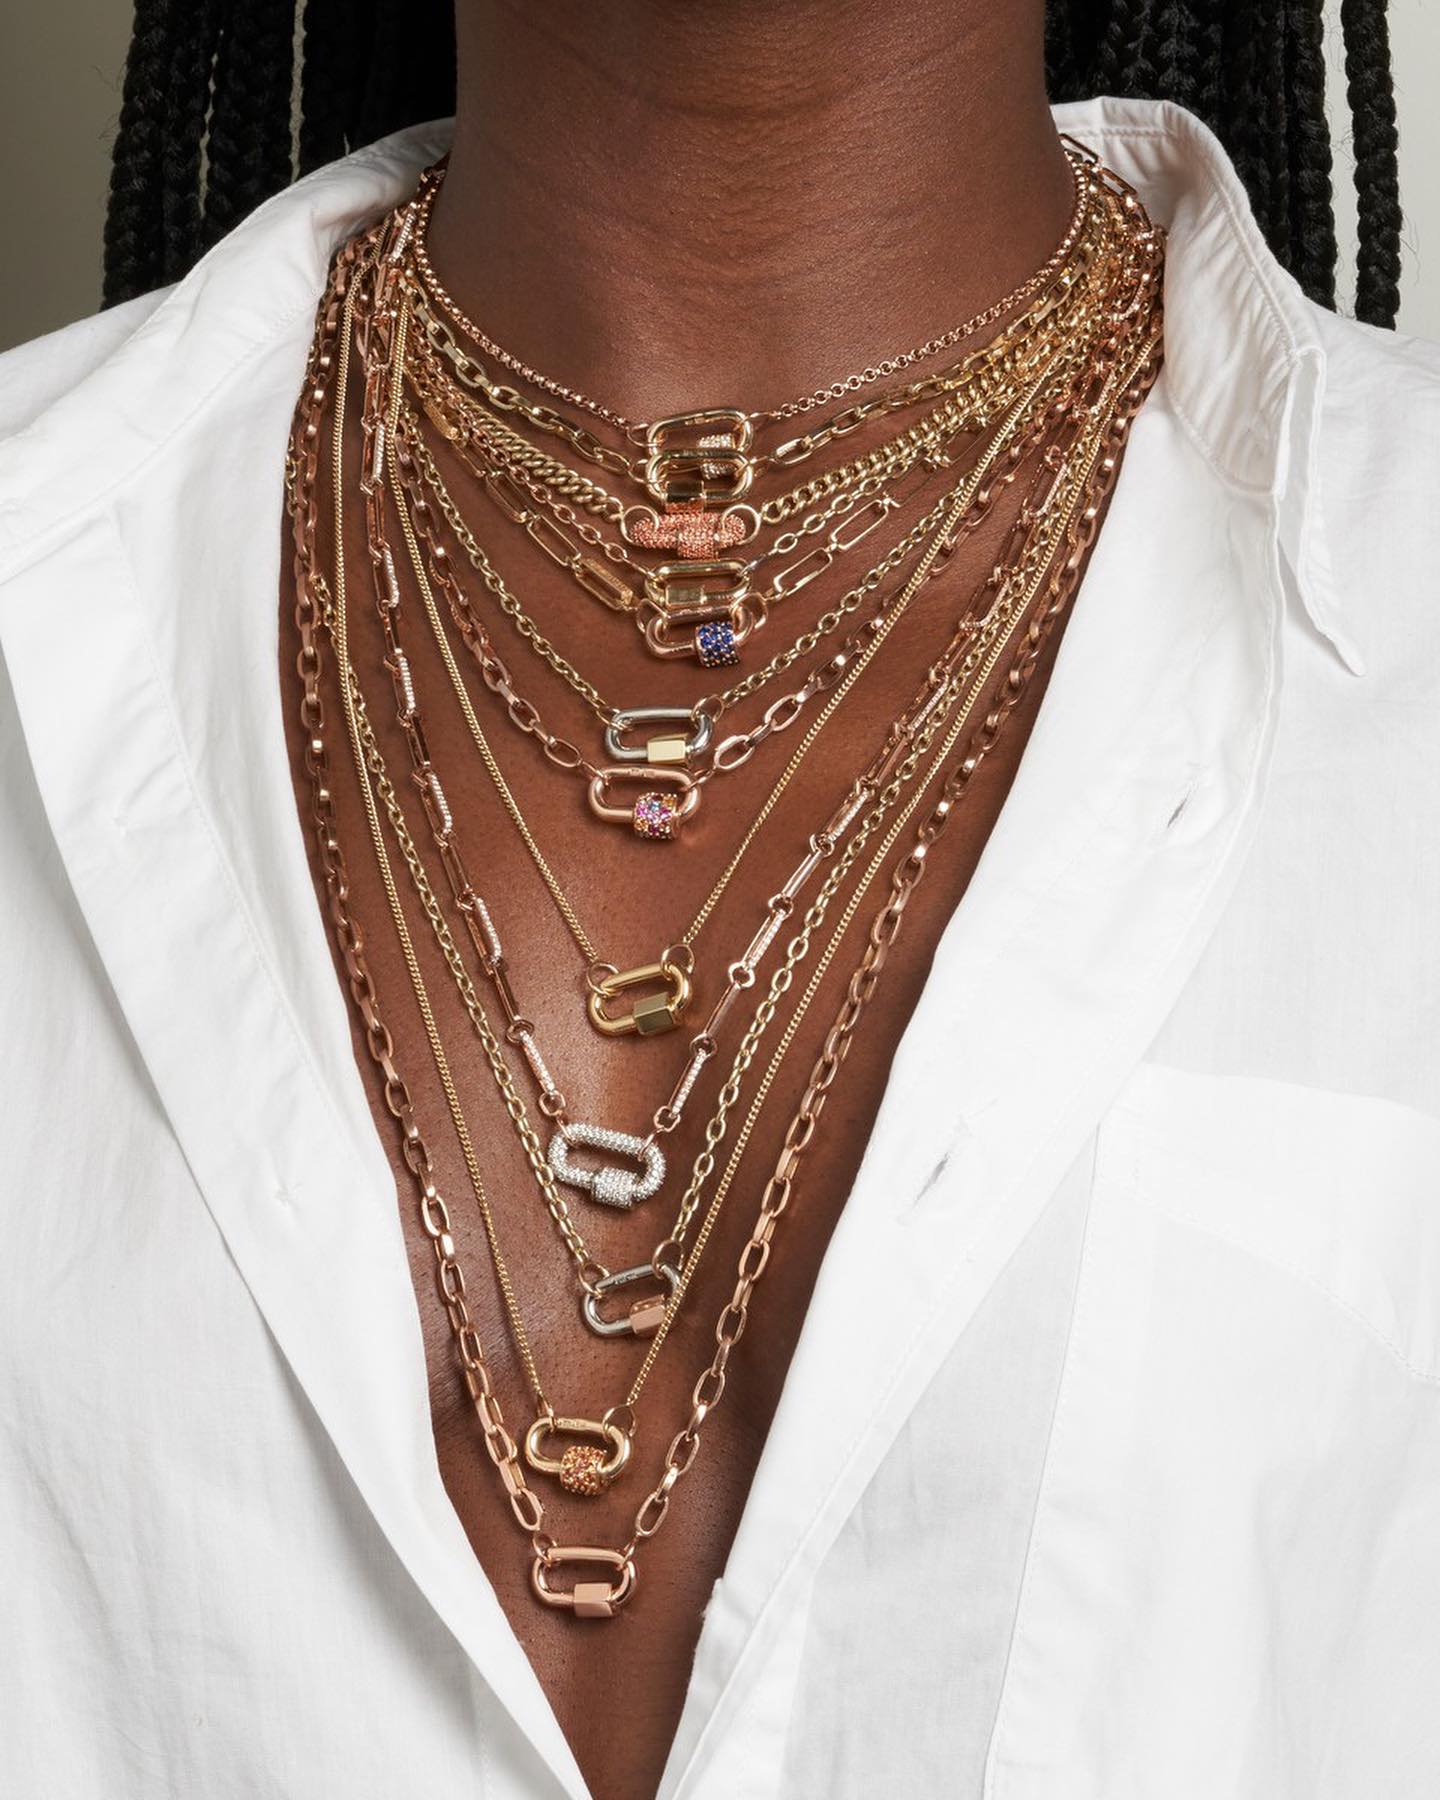 Close up of woman's decolletage wearing many necklaces including very fine gold chain necklace